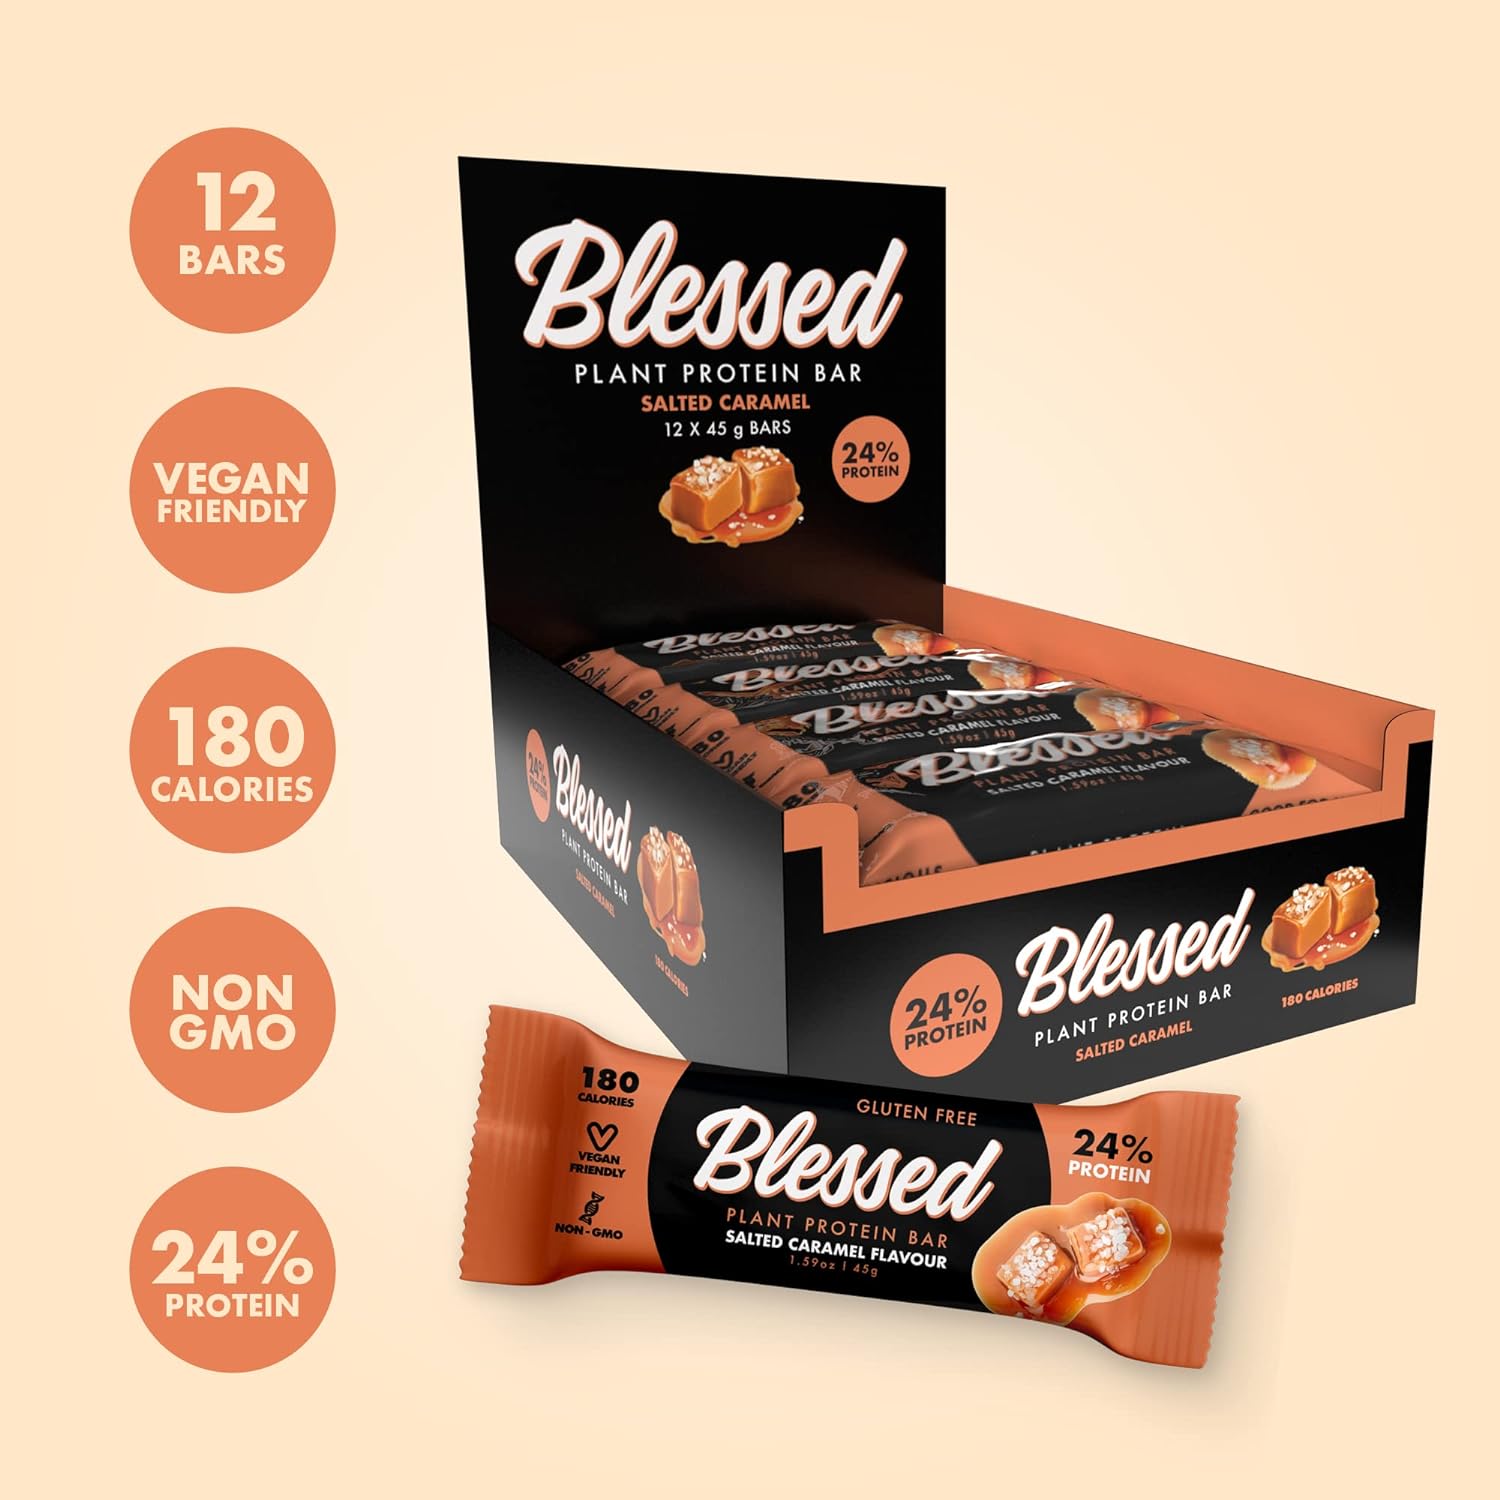 Blessed Vegan Protein Bars - Plant Based Protein Bars Low Calorie High